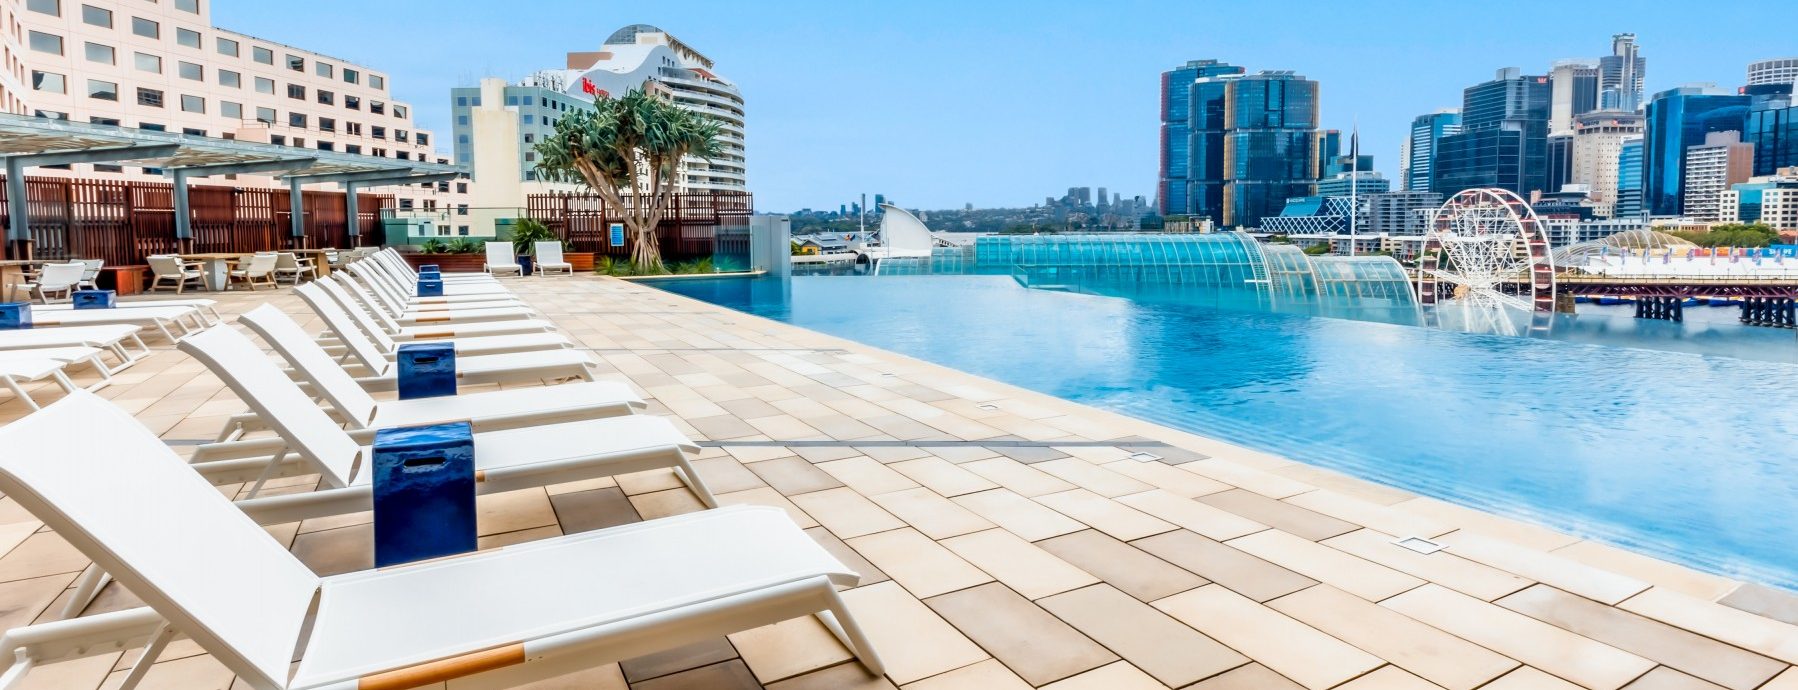 sofitel-sydney-darling-harbour-hotel-pool-deck-looking-out